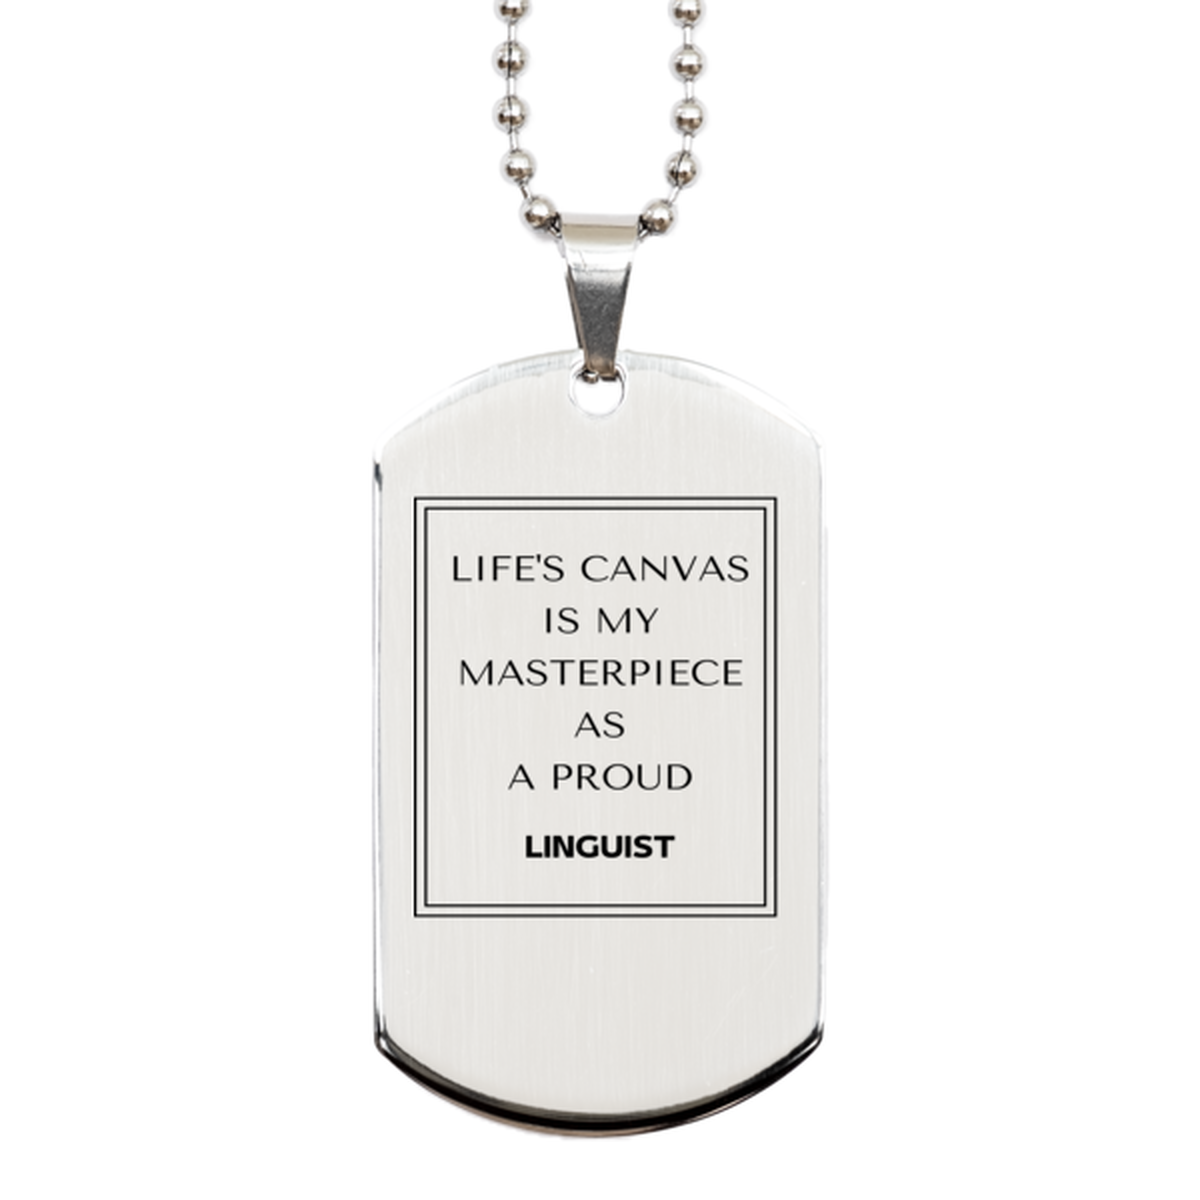 Proud Linguist Gifts, Life's canvas is my masterpiece, Epic Birthday Christmas Unique Silver Dog Tag For Linguist, Coworkers, Men, Women, Friends